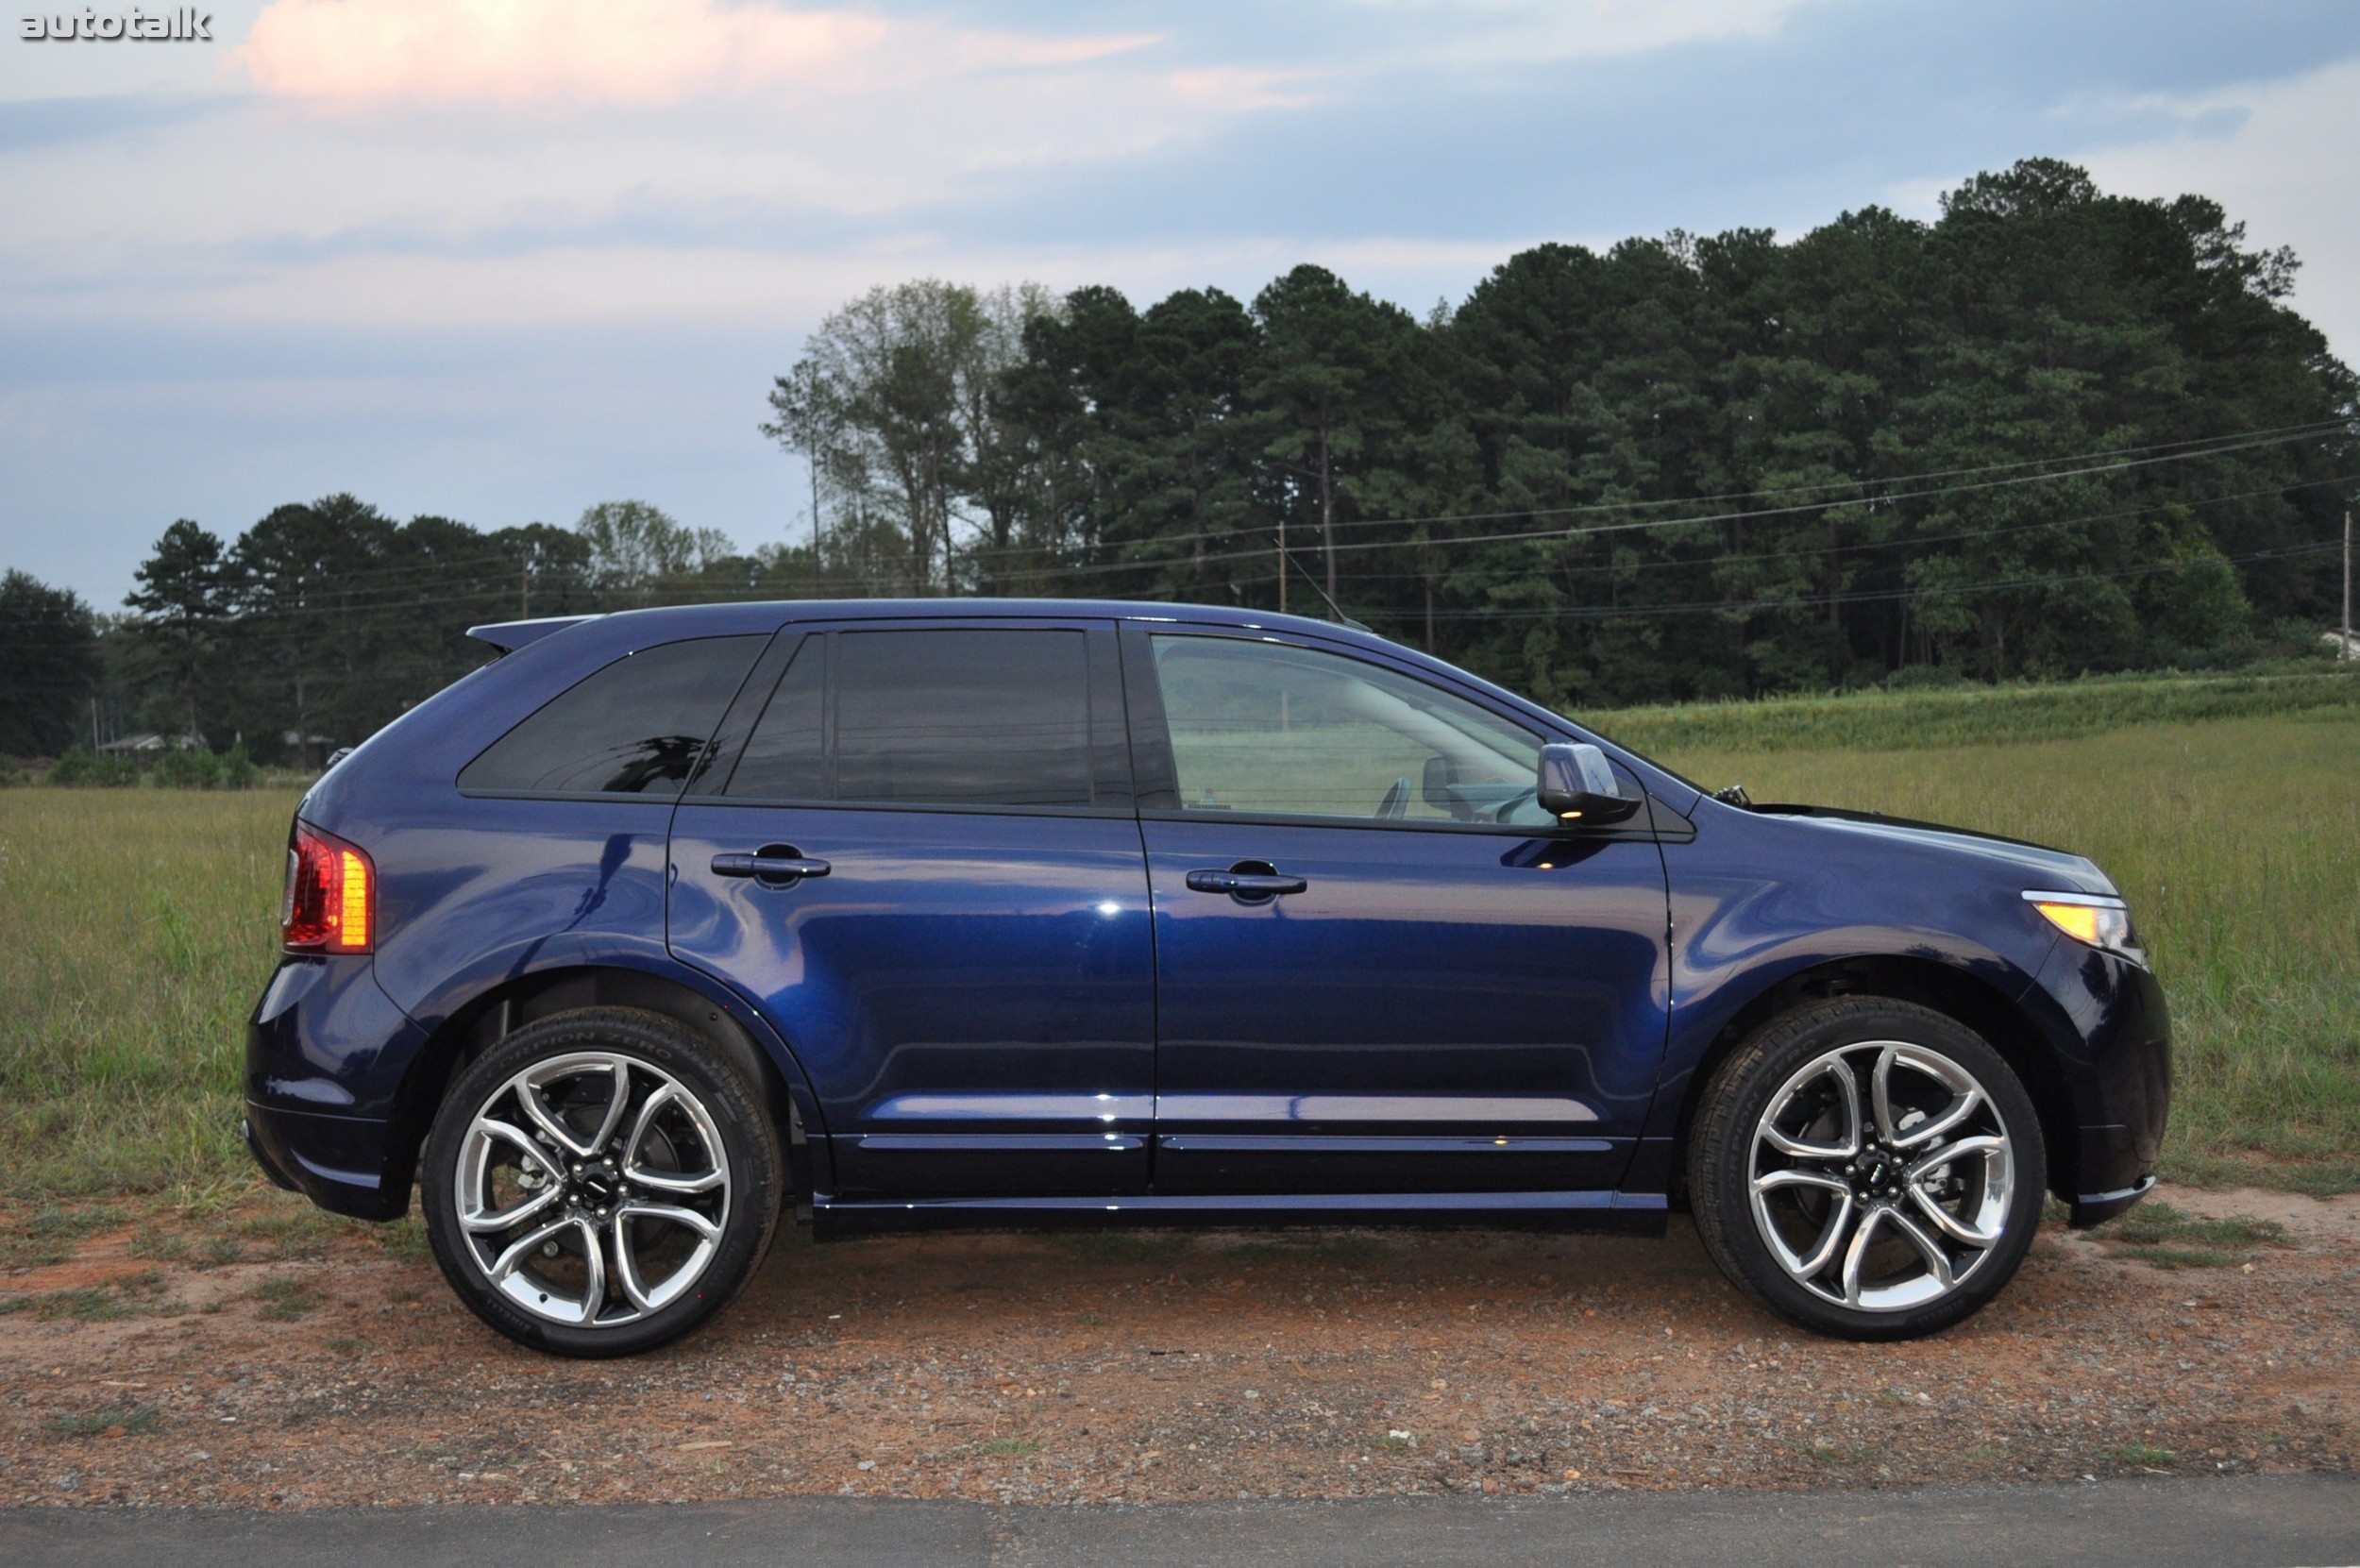 2011 Ford Edge Sport Review